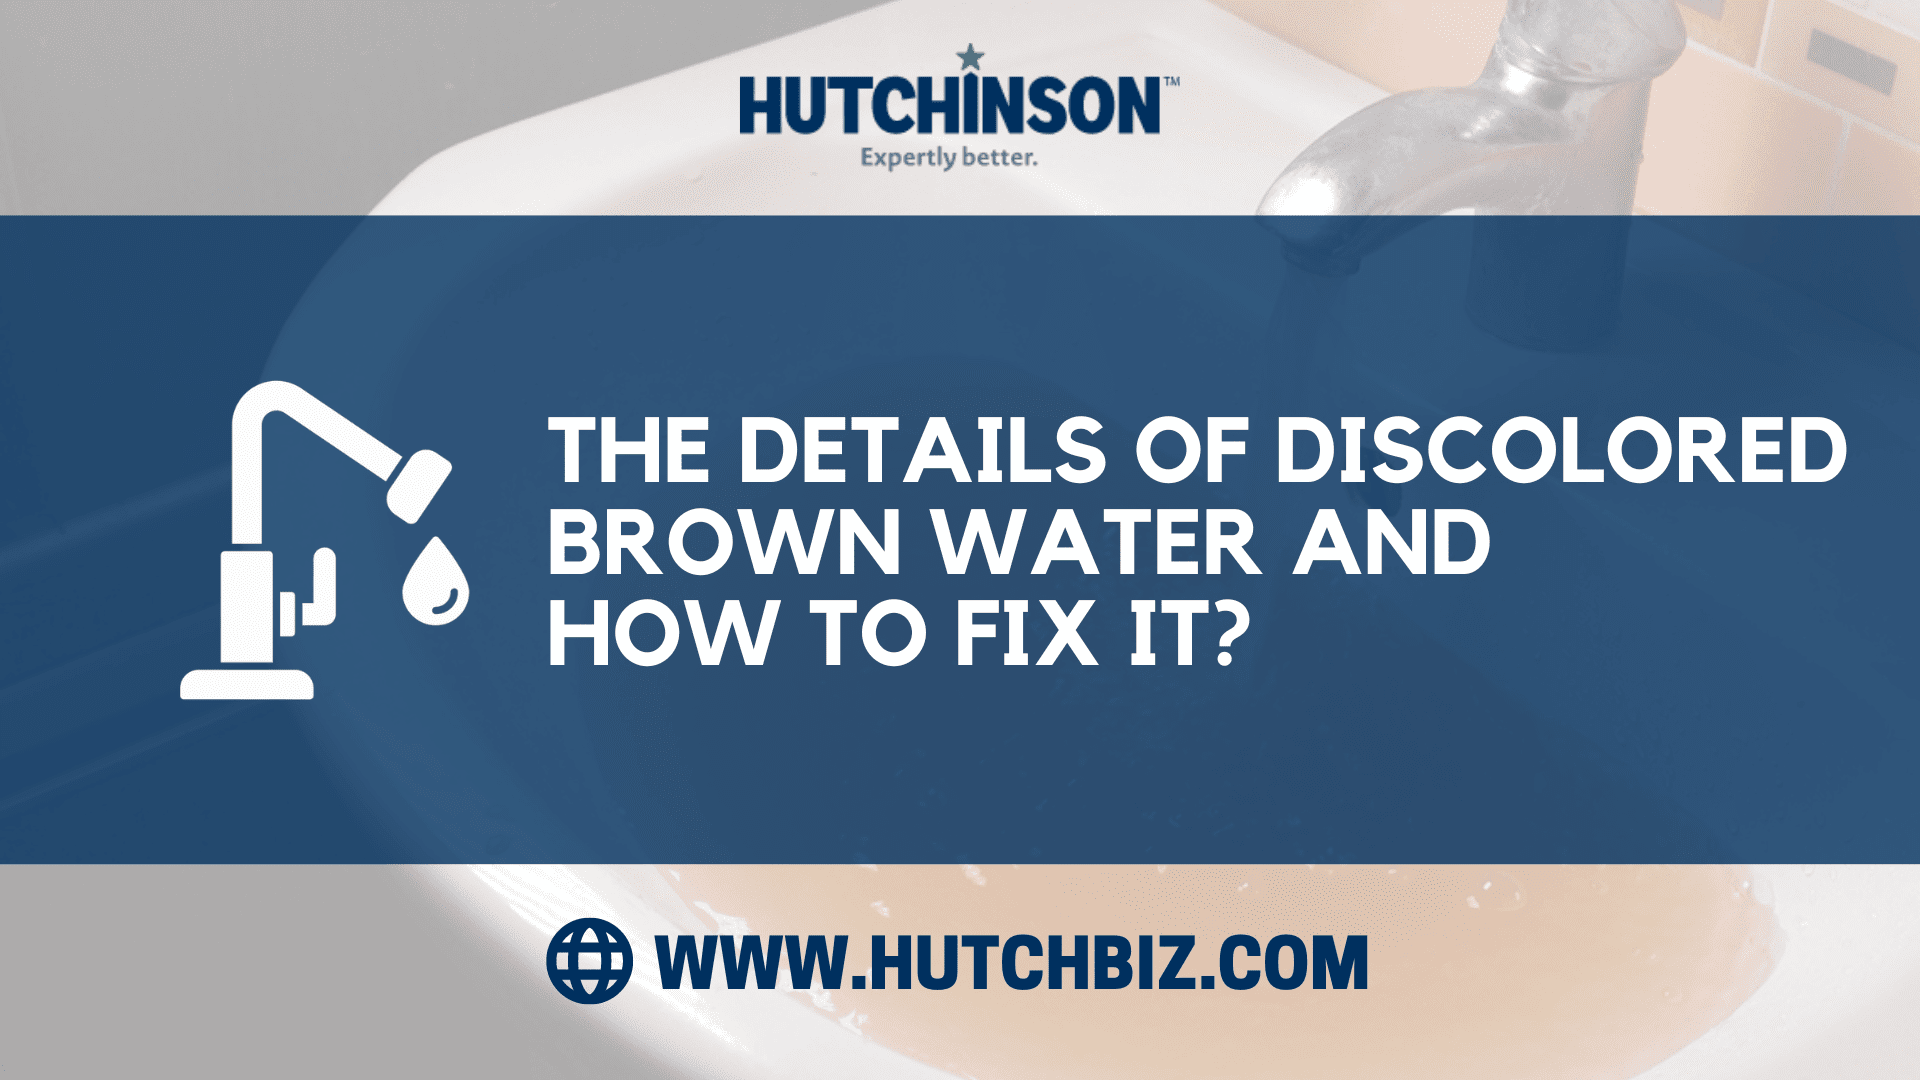 What is a water backflow preventer? Why do you need to install it?